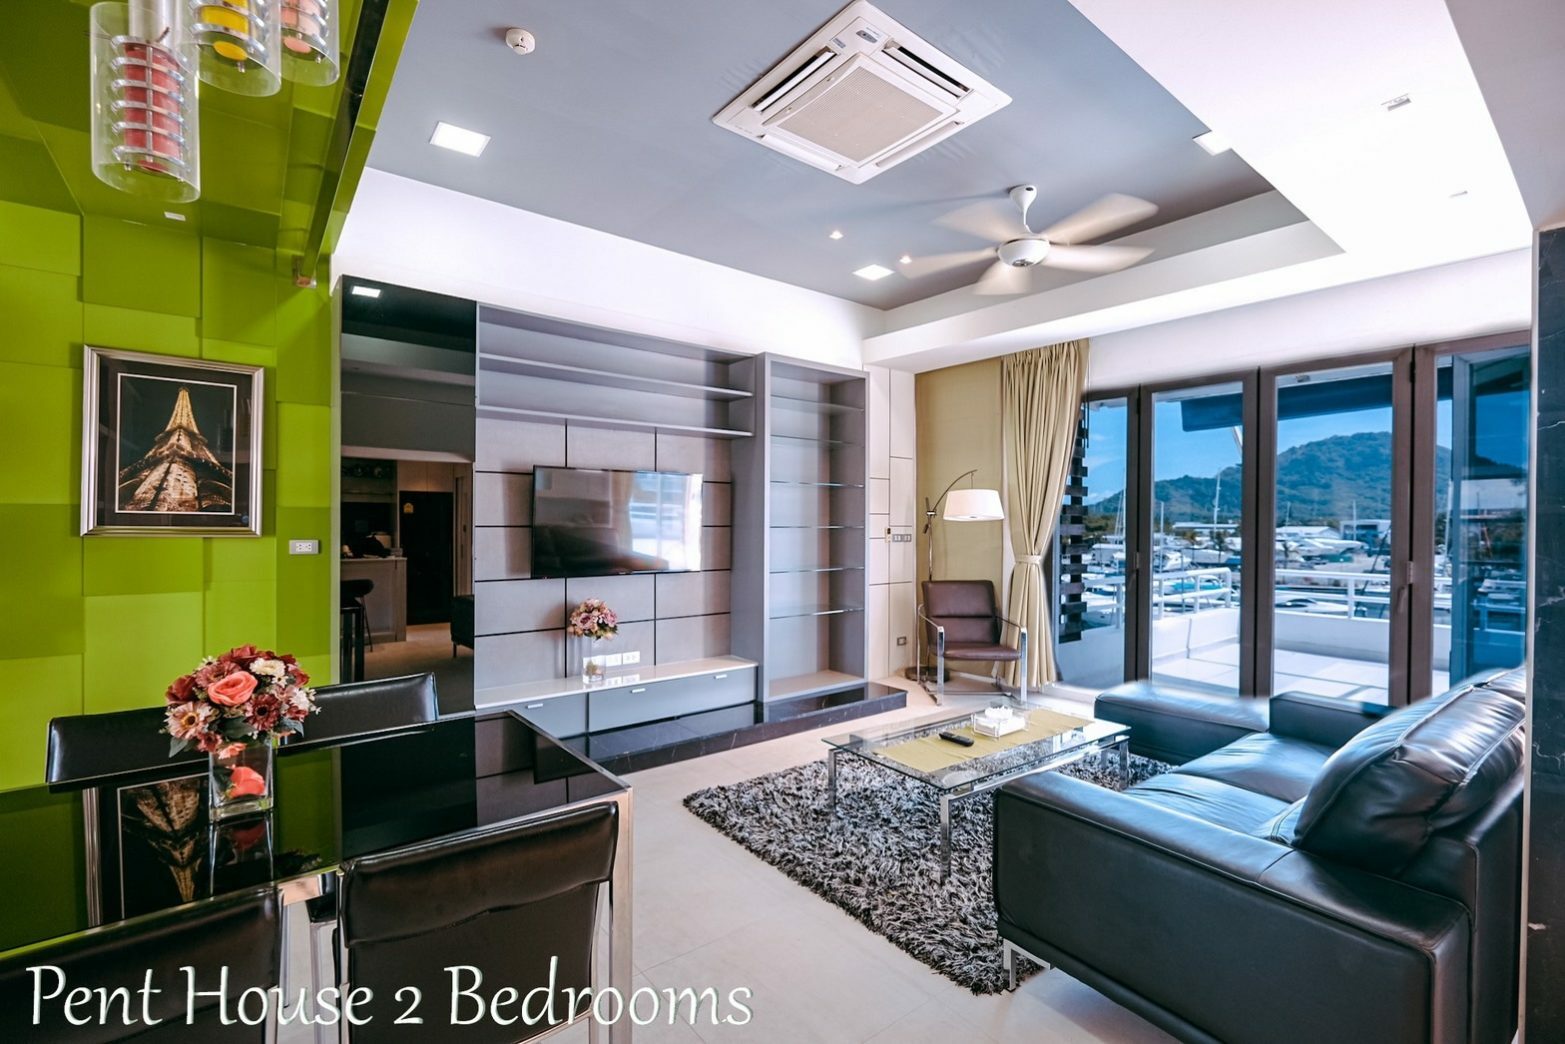 Penthouse 2 bedrooms